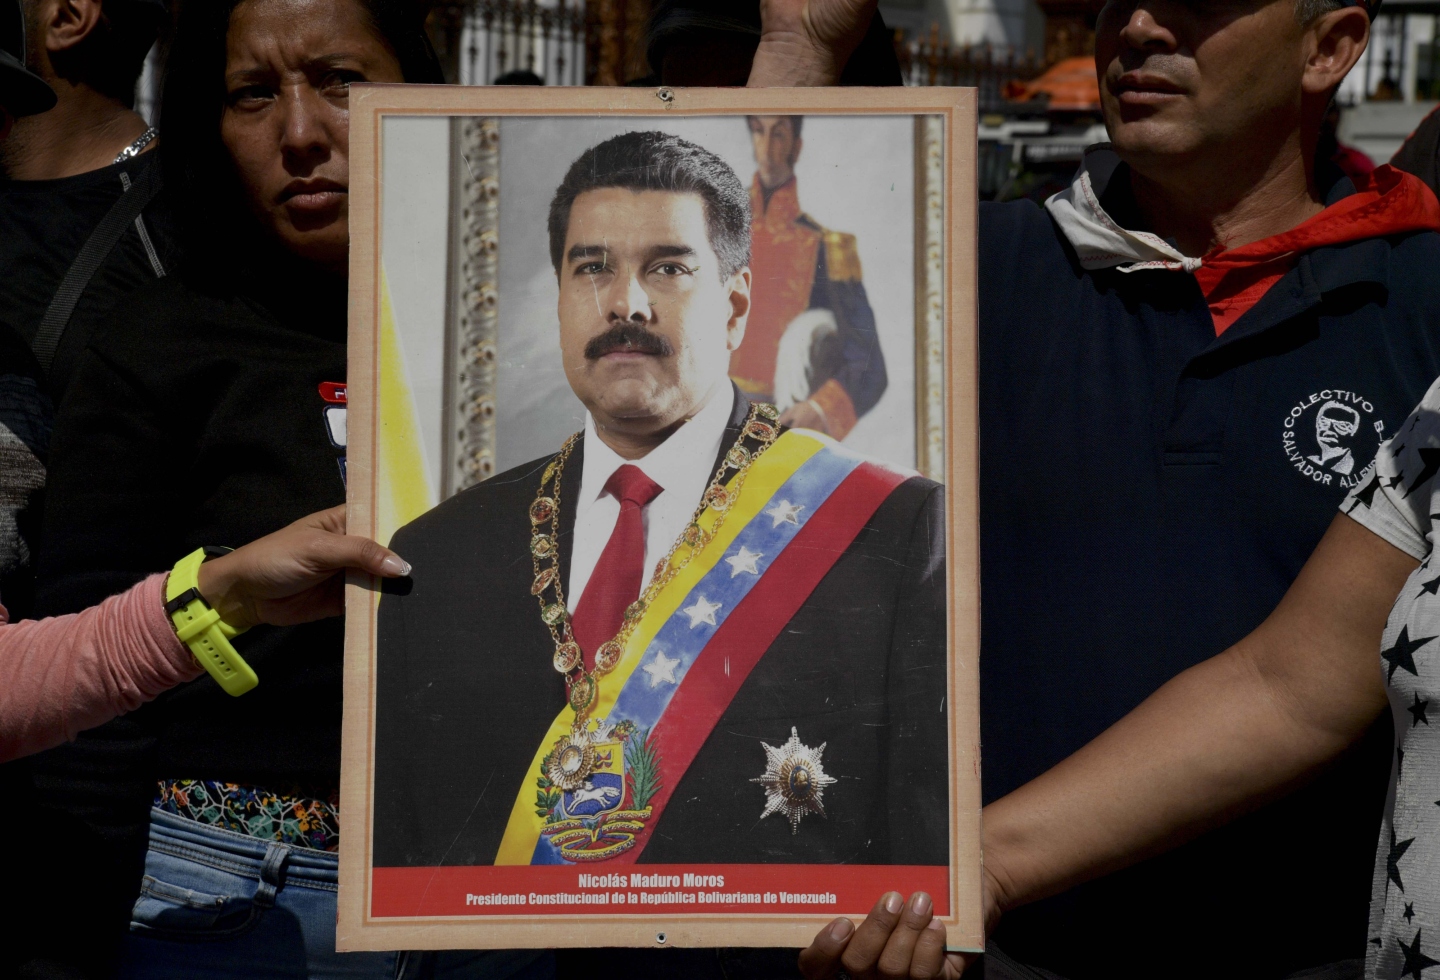 They admit guardianship that seeks to allow Nicolás Maduro's assistance to Petro's possession